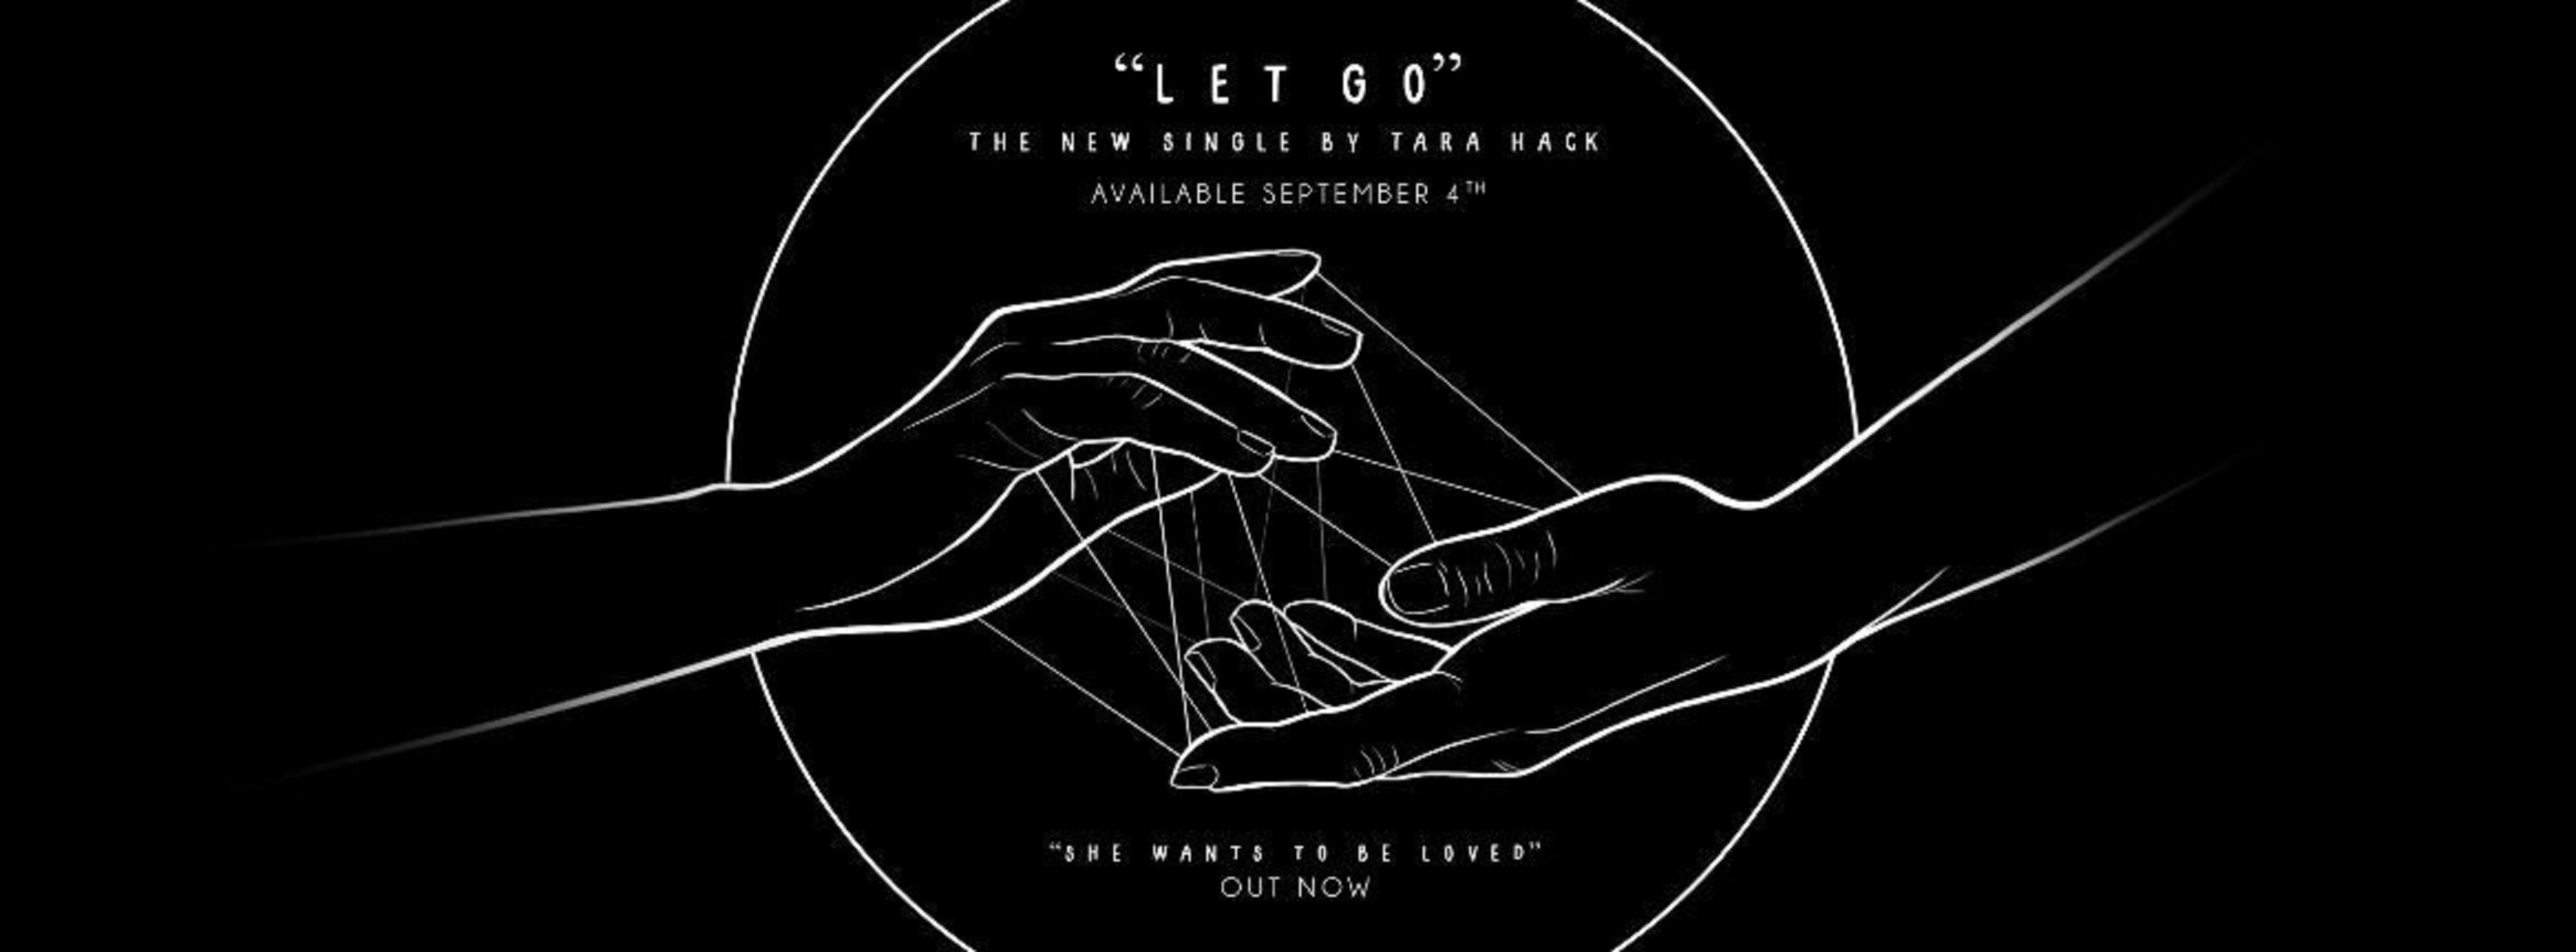 Tara Hack's New Single “Let Go” Out Now